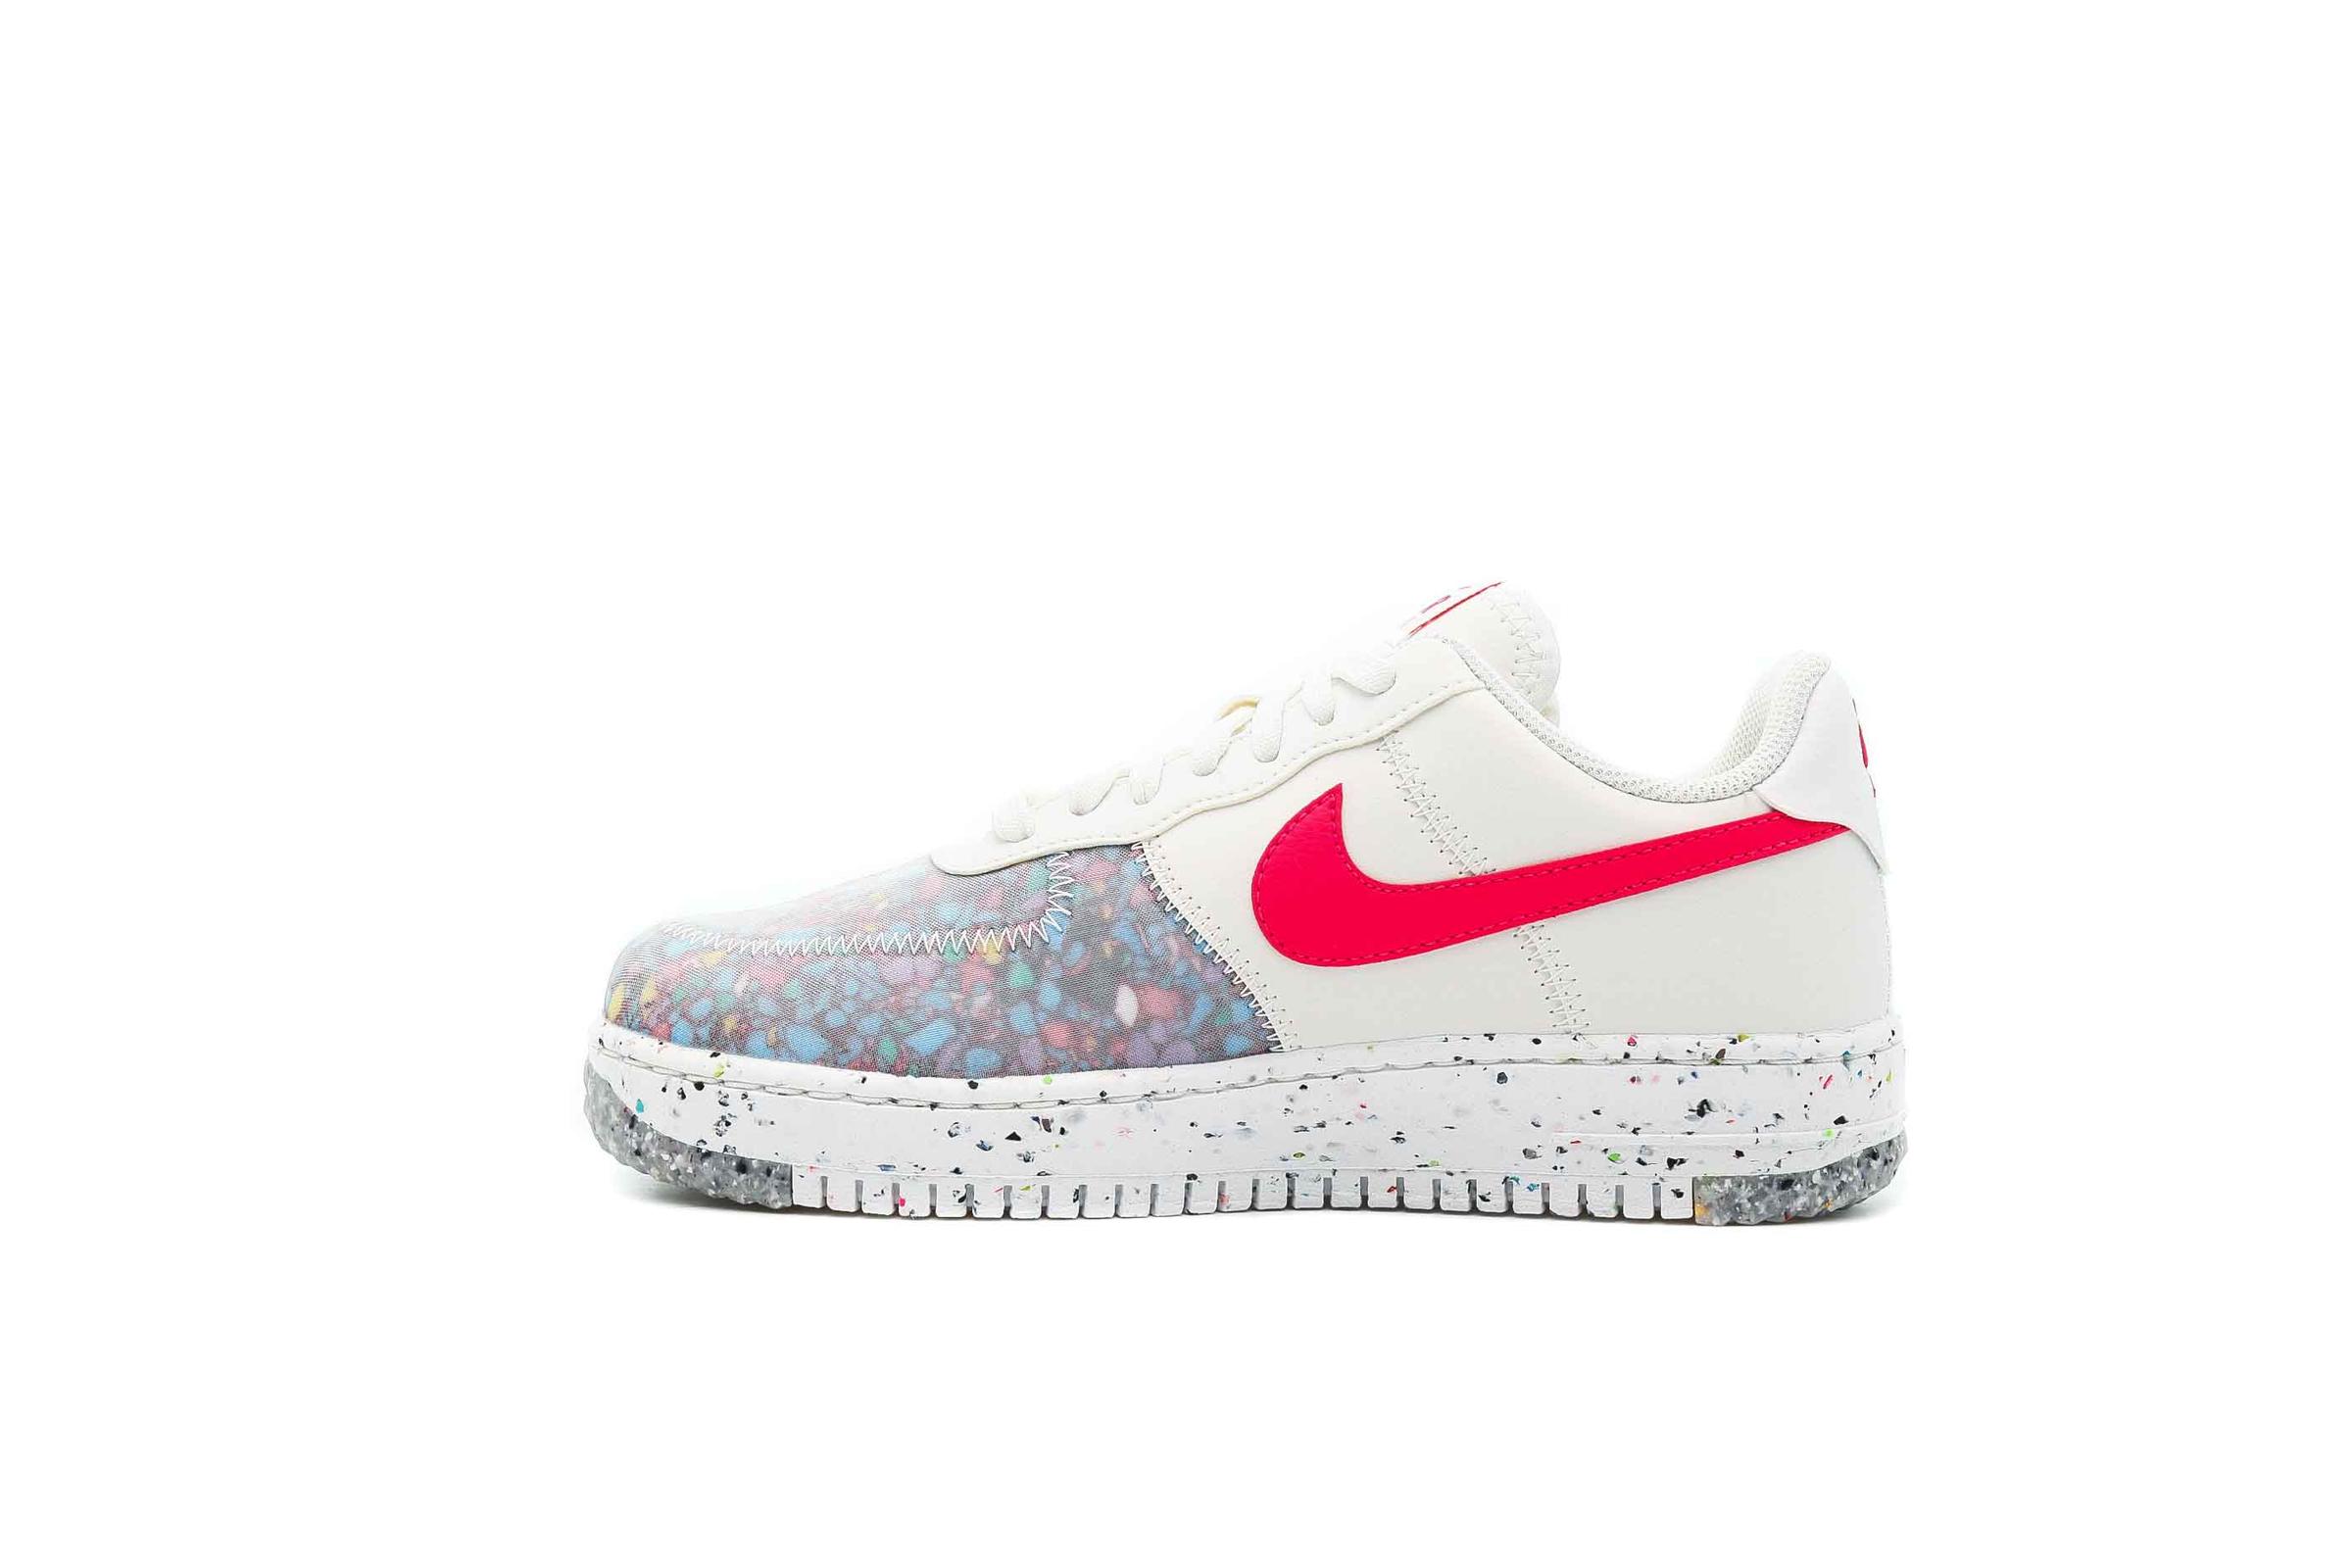 Nike WMNS AIR FORCE 1 CRATER "SUMMIT WHITE"